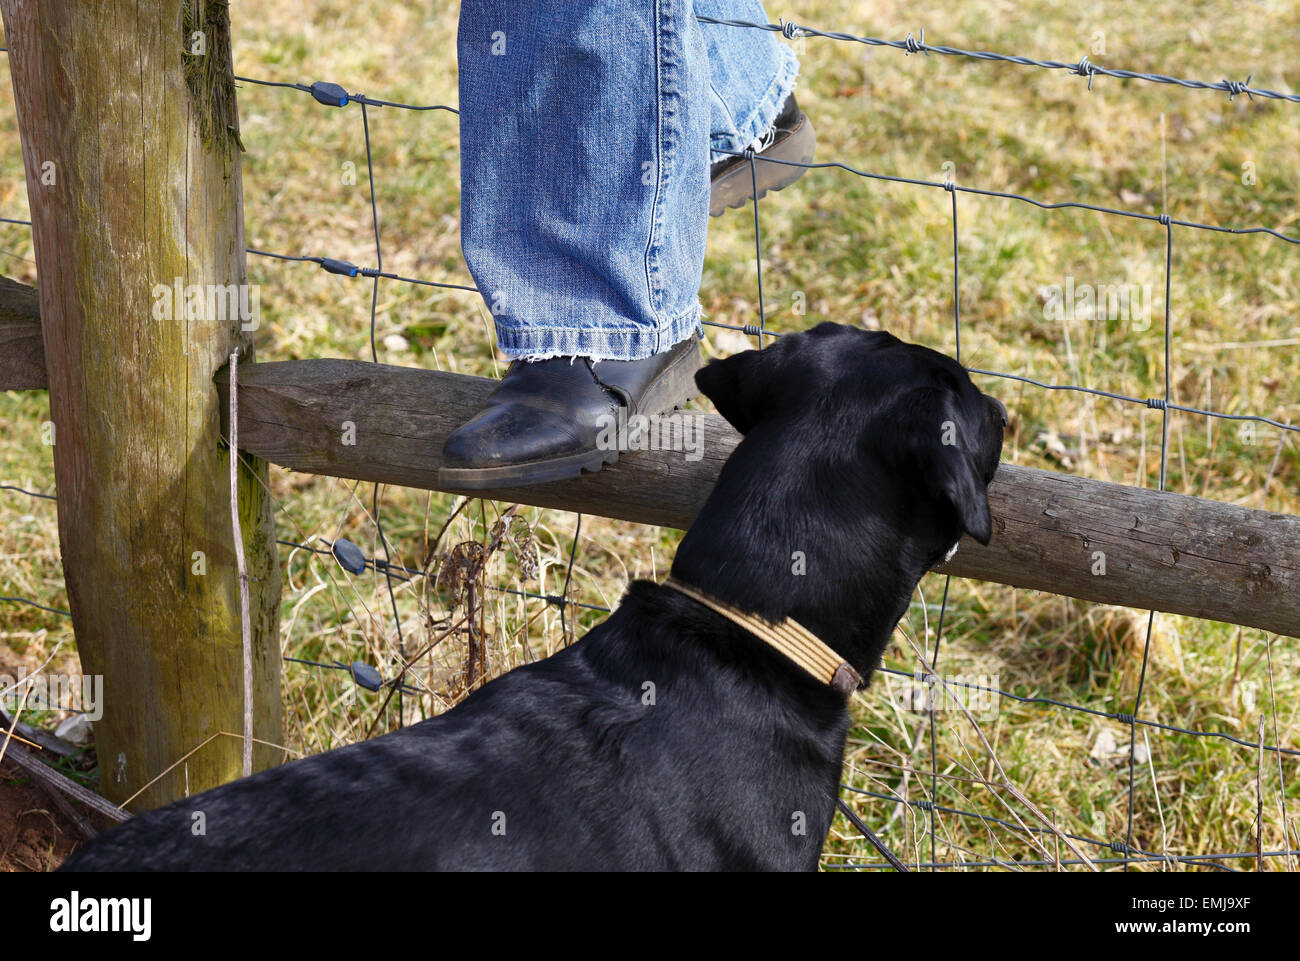 Woman in blue jeans climbing over a fence with barbed wire on a country walk. Stock Photo